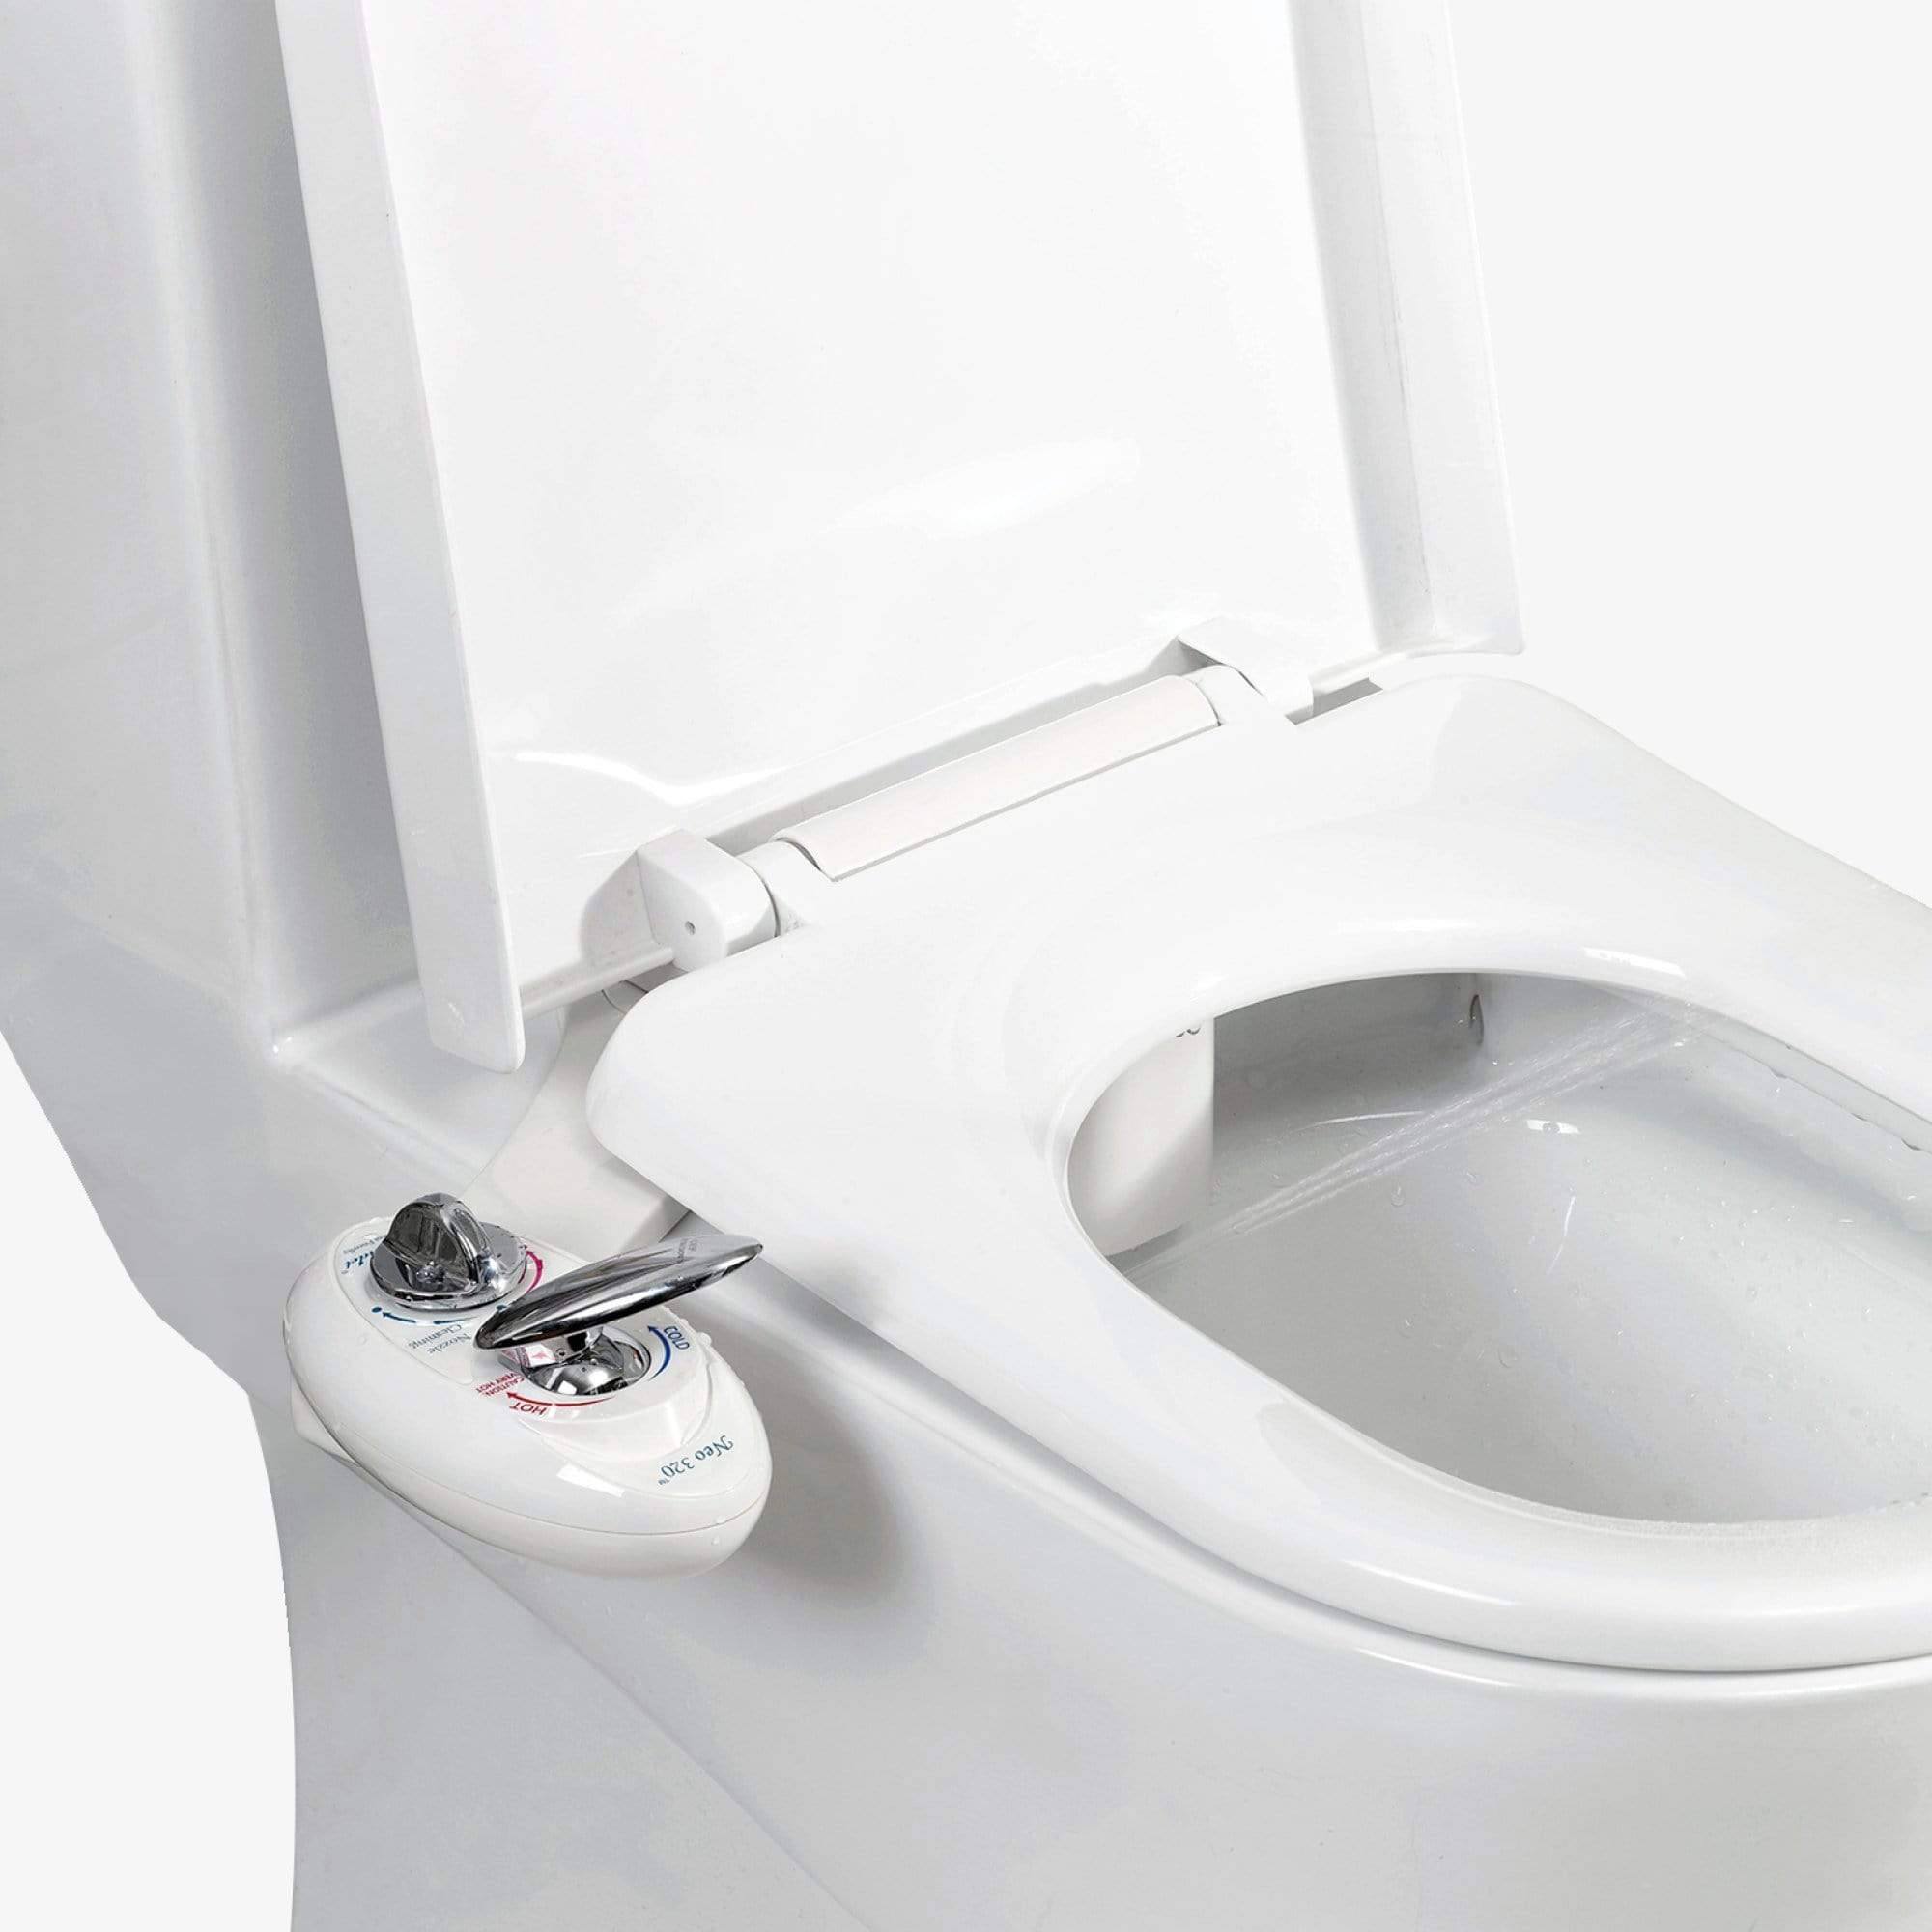 NEO 320: Imperfect Packaging - NEO 320 White installed on a toilet with water spraying from nozzles